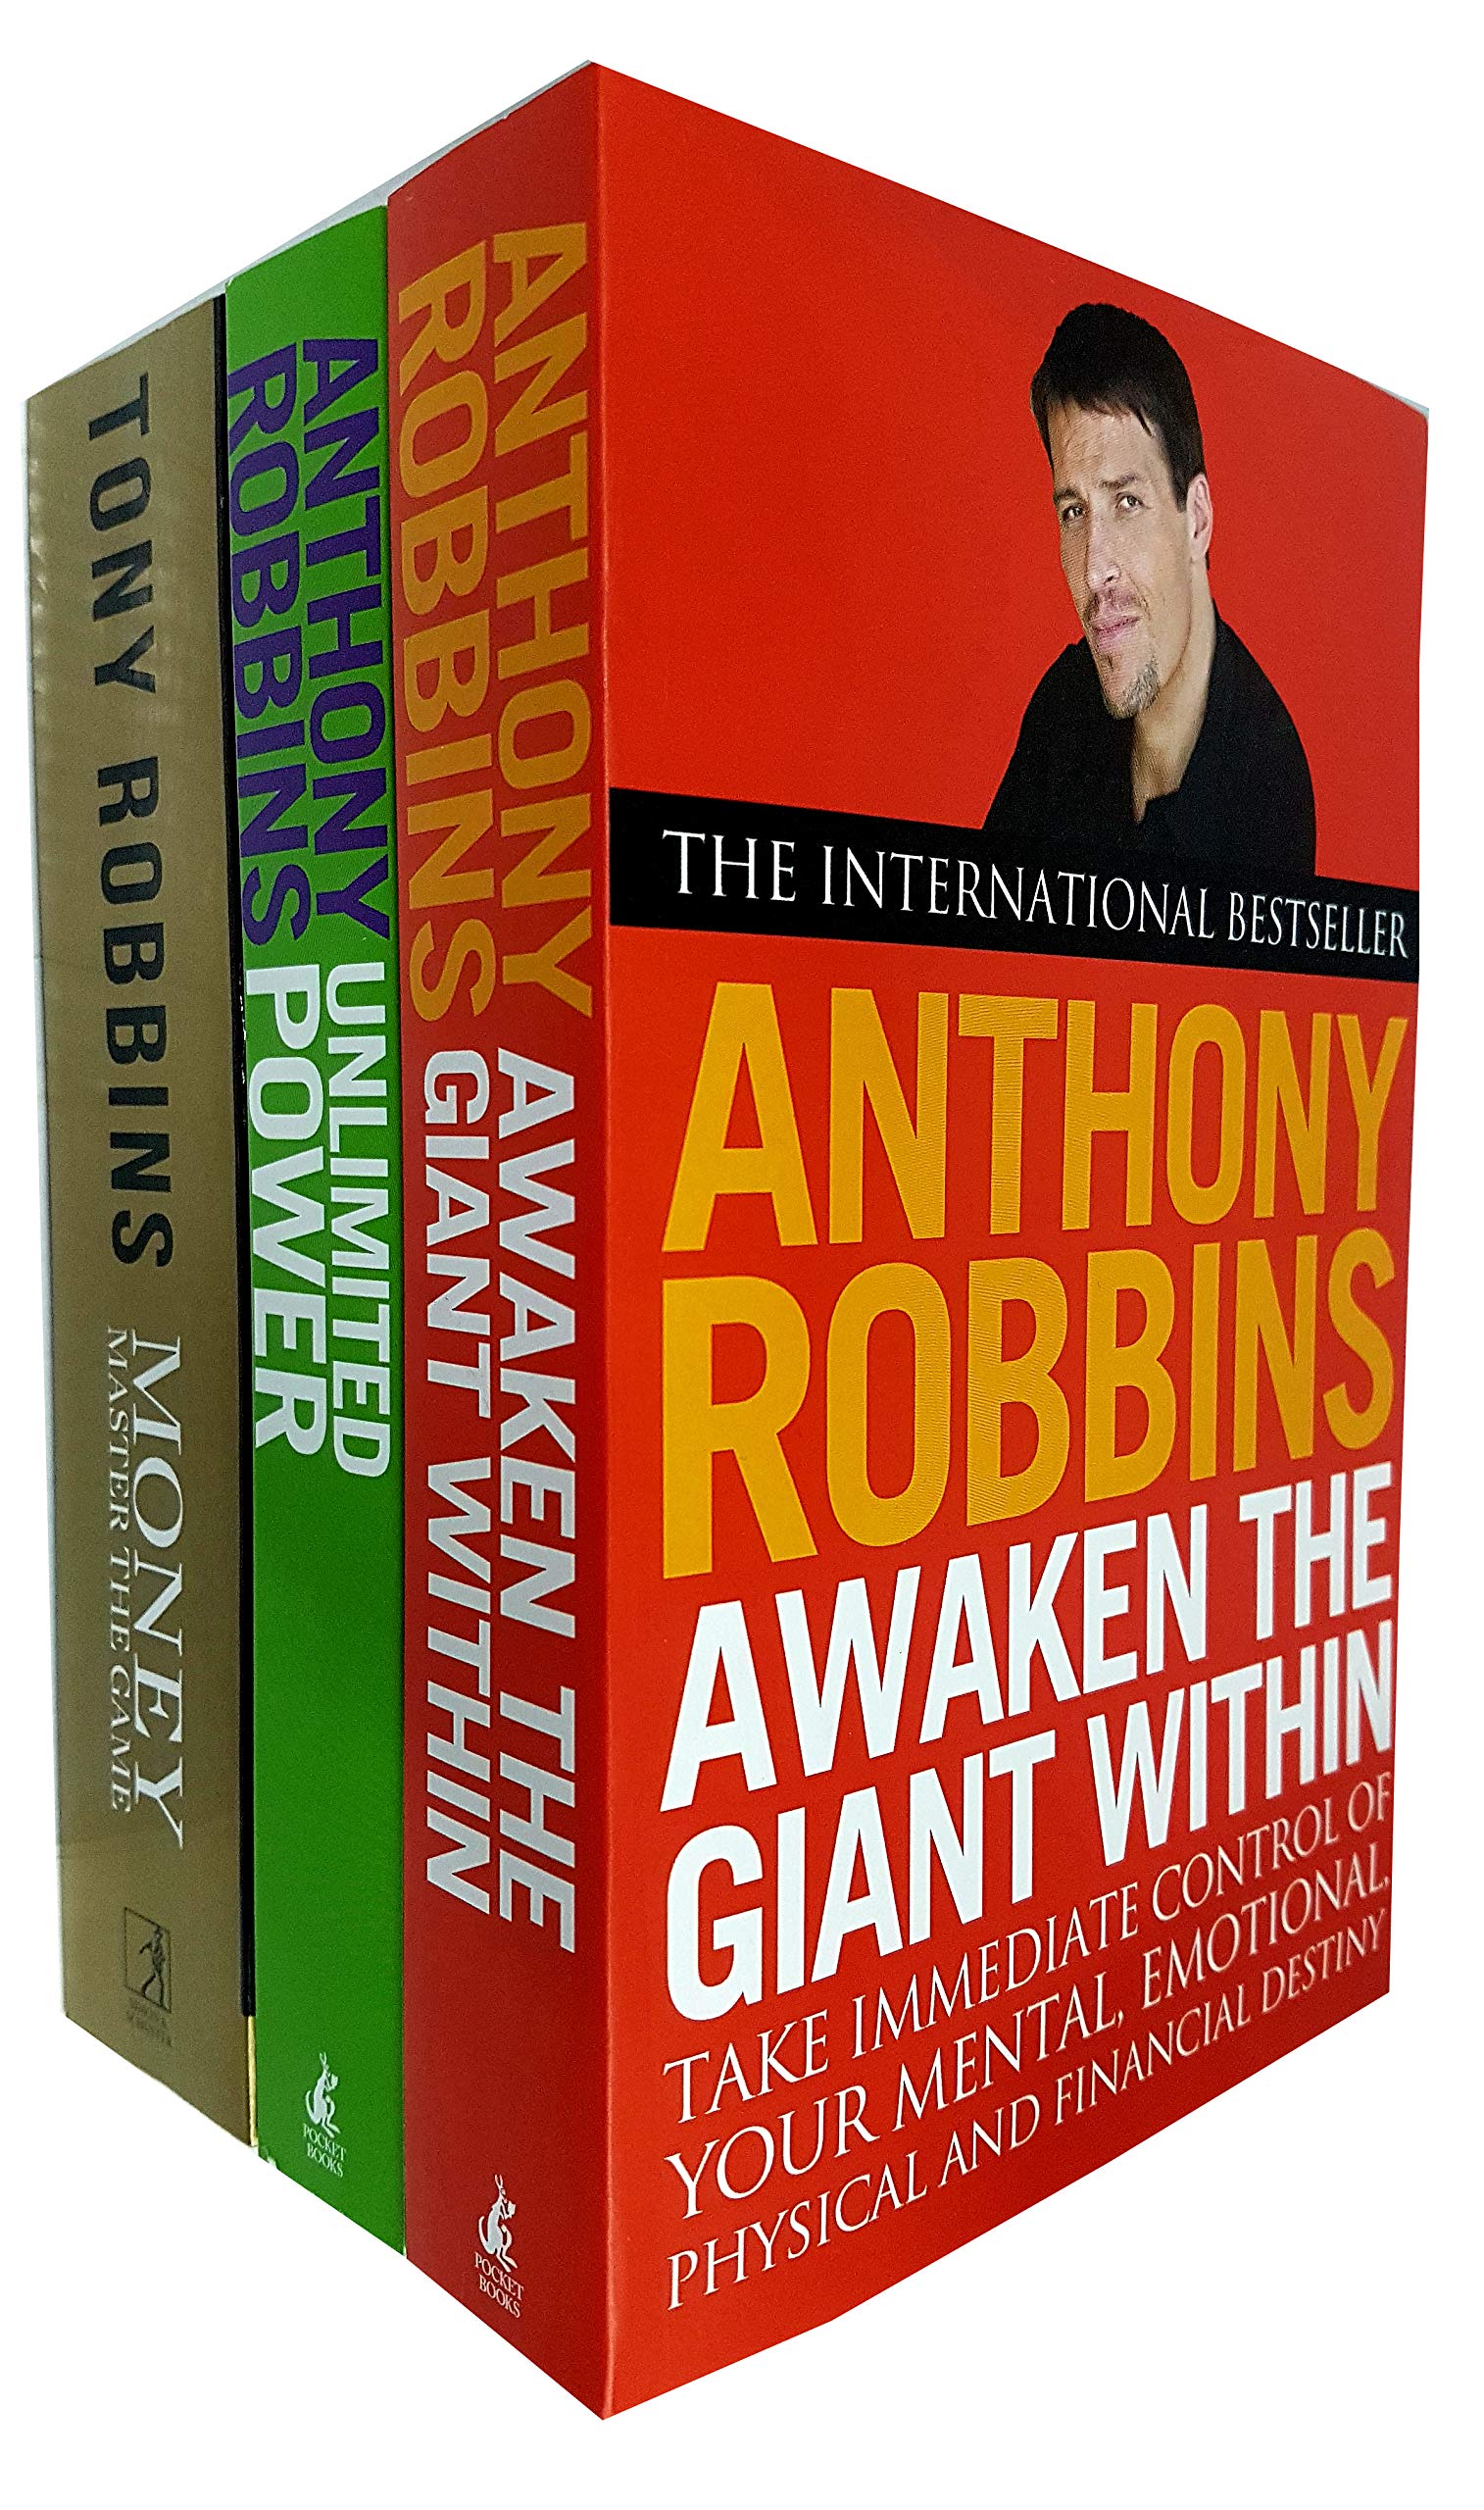 Tony Robins 3 Books Collection Set (Awaken The Giant Within & More...) Paperback - Lets Buy Books